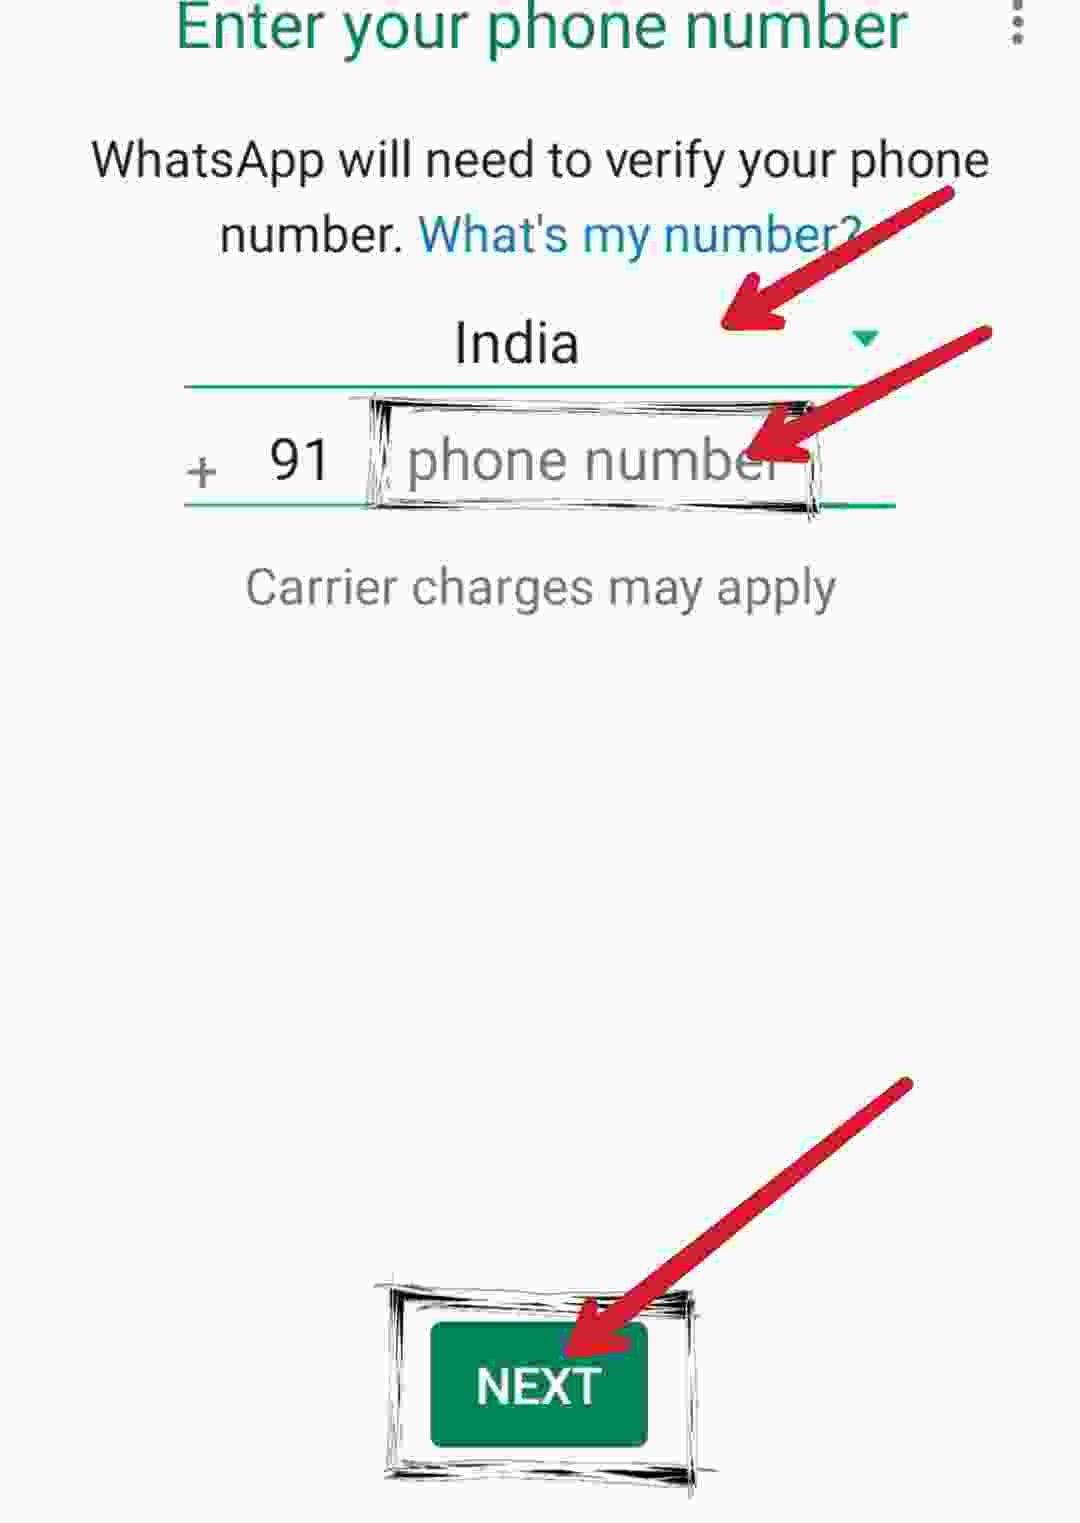 Inter your phone number